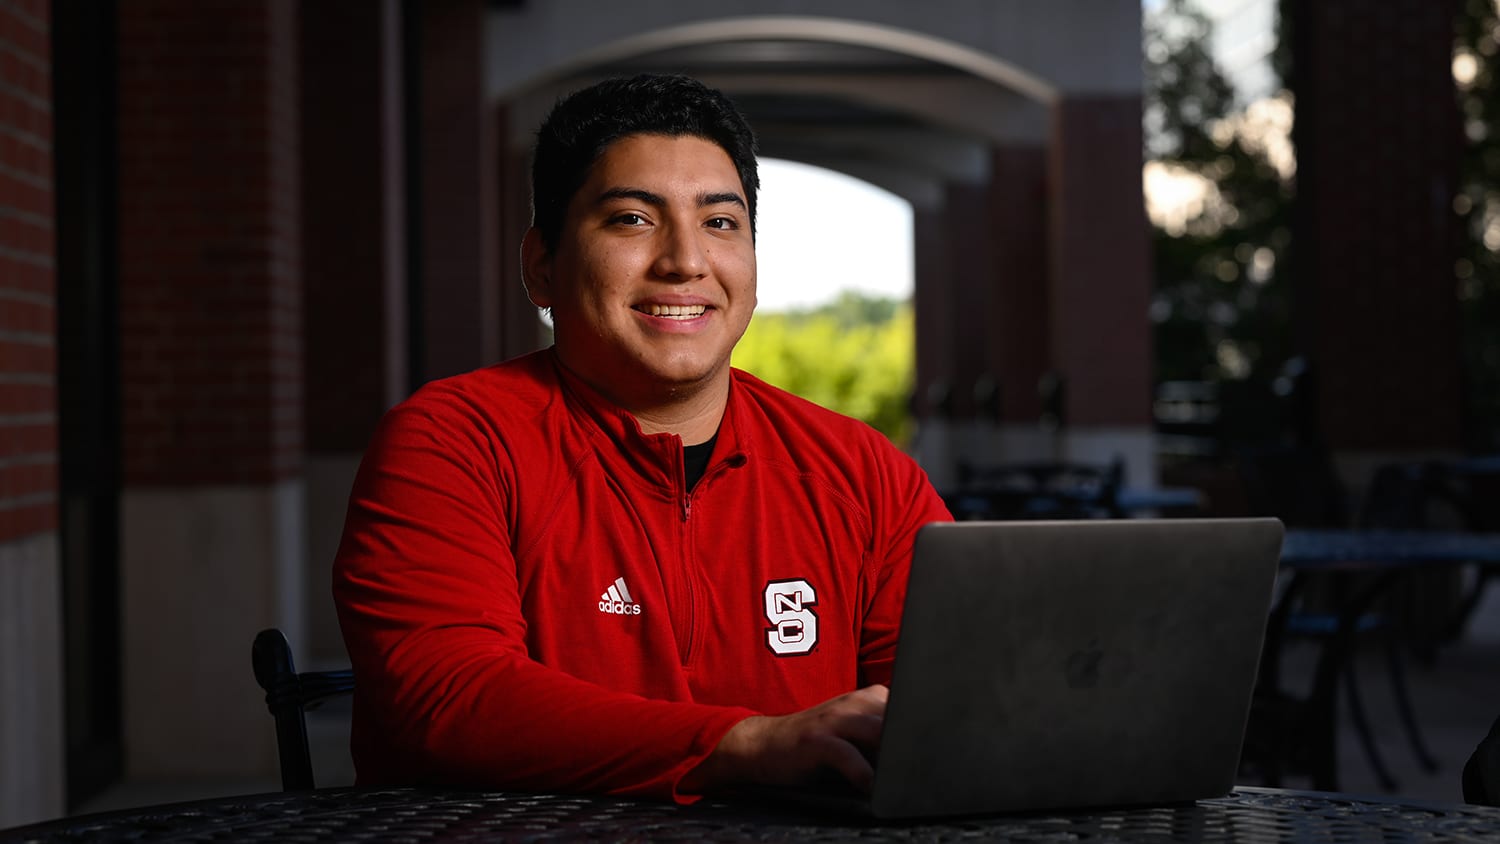 Carlos Alonzo-Montufar is pictured outside the Wilson College of Textiles, seated at a table with a laptop.